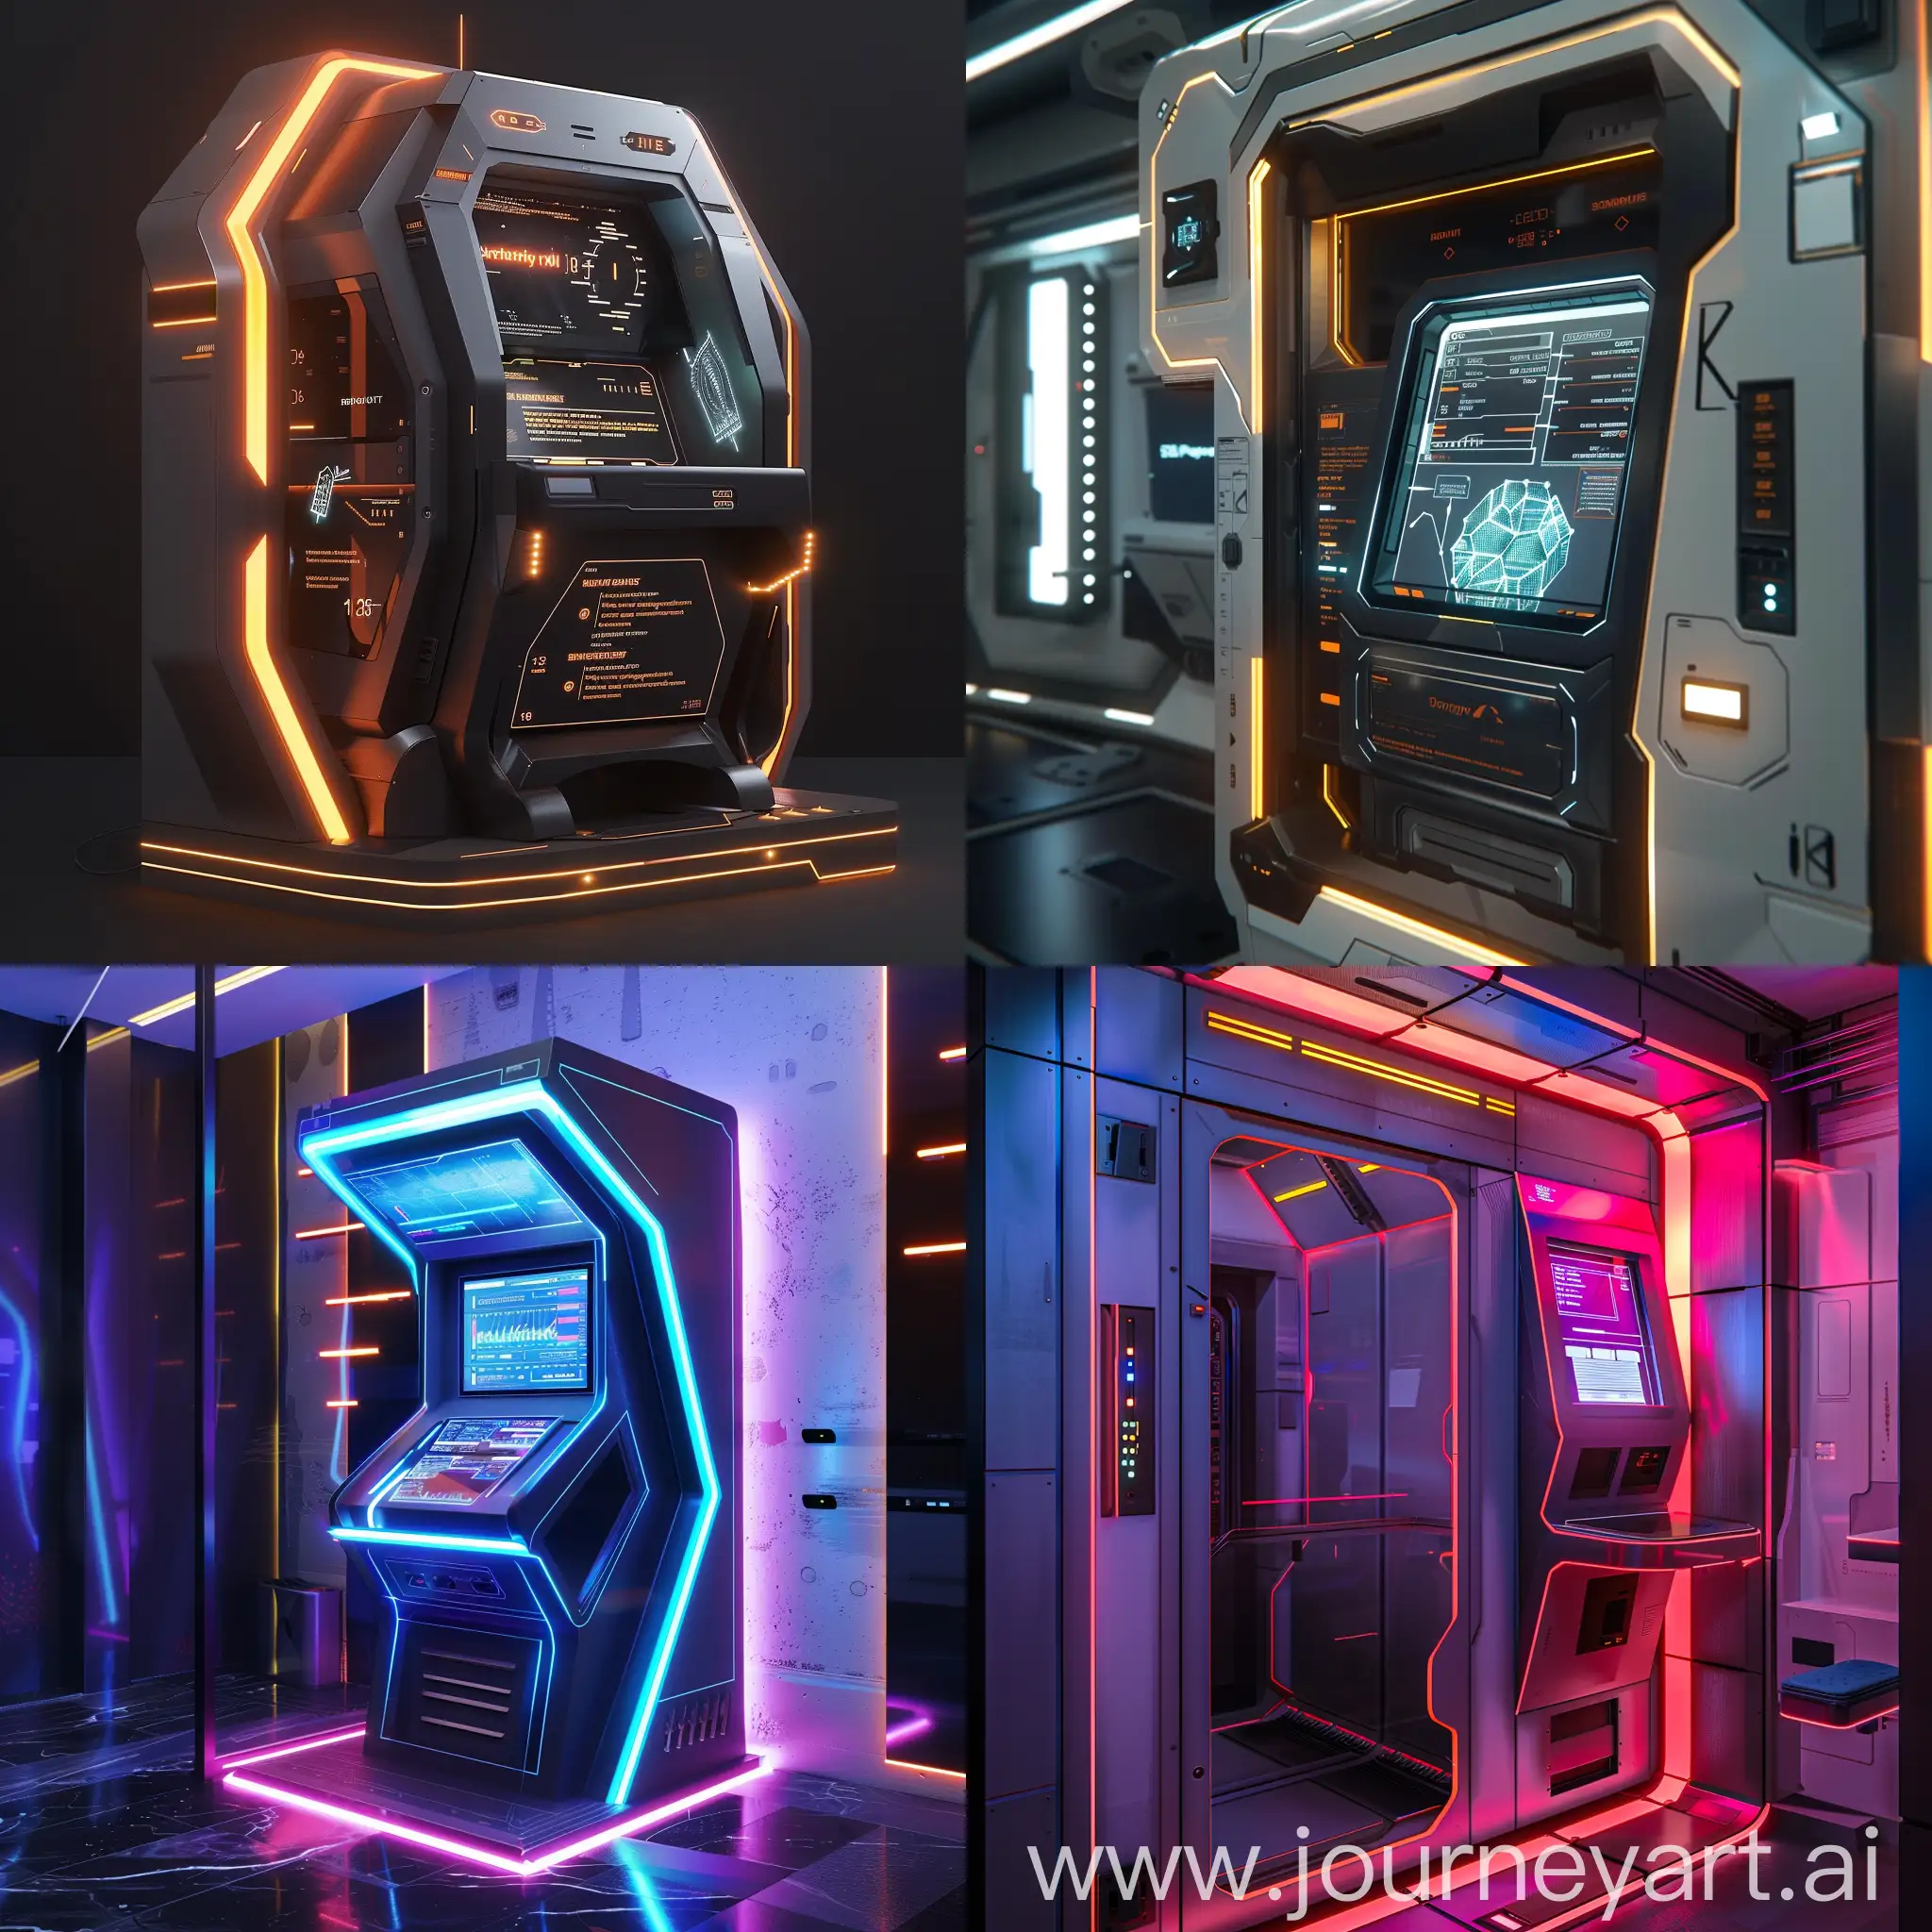 Advanced-SciFi-ATM-Machine-with-Biometric-Authentication-and-Holographic-Display